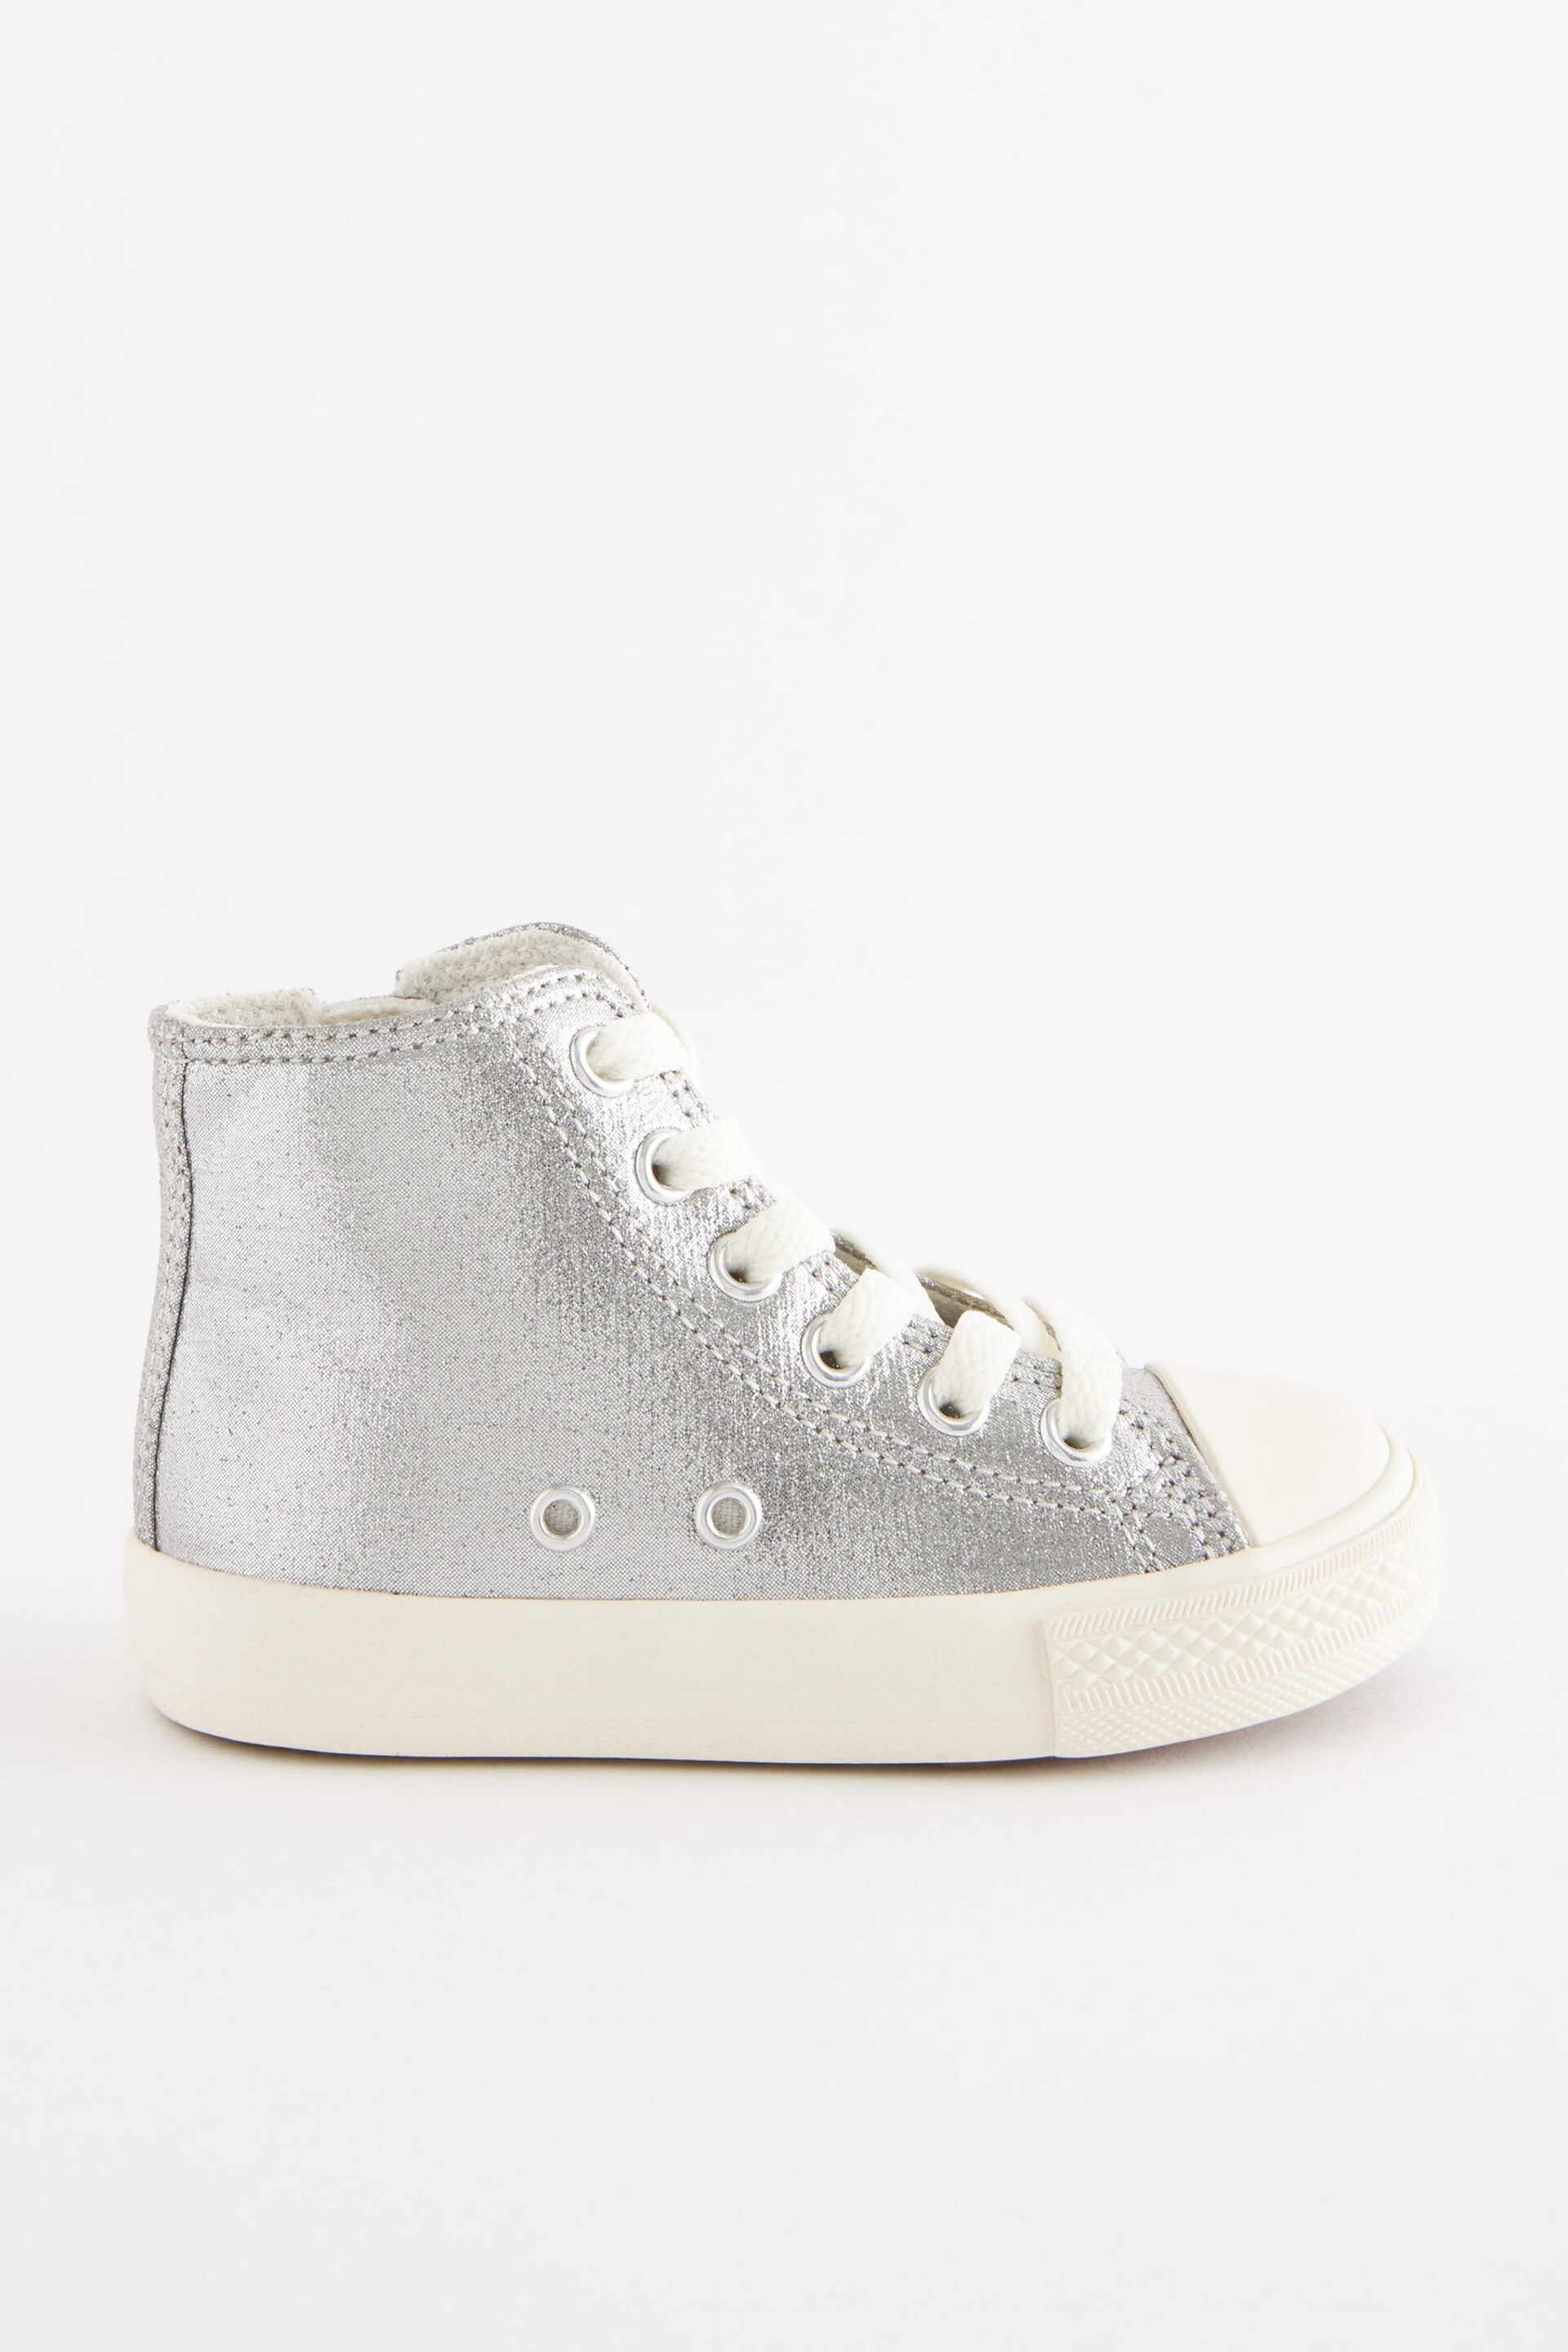 Silver Standard Fit (F) High Top Trainers - Image 2 of 6